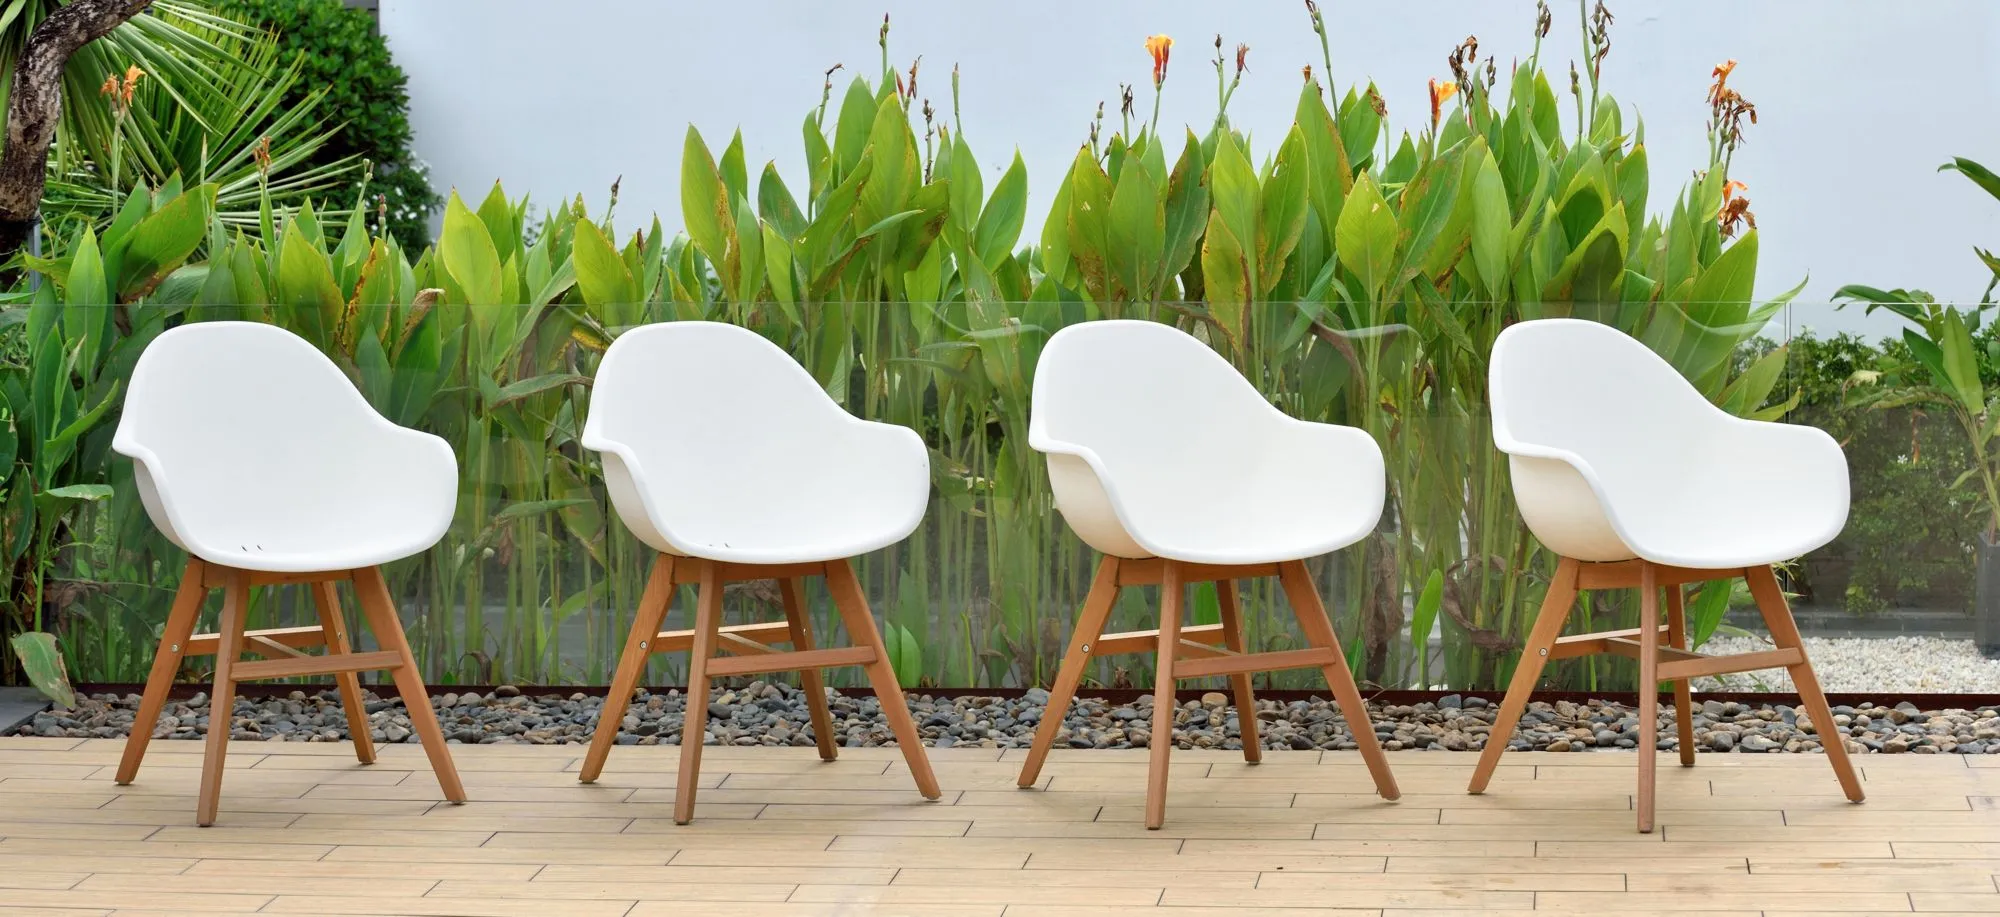 Amazonia Outdoor 4-pc. Eucalyptus Chairs in Brown by International Home Miami